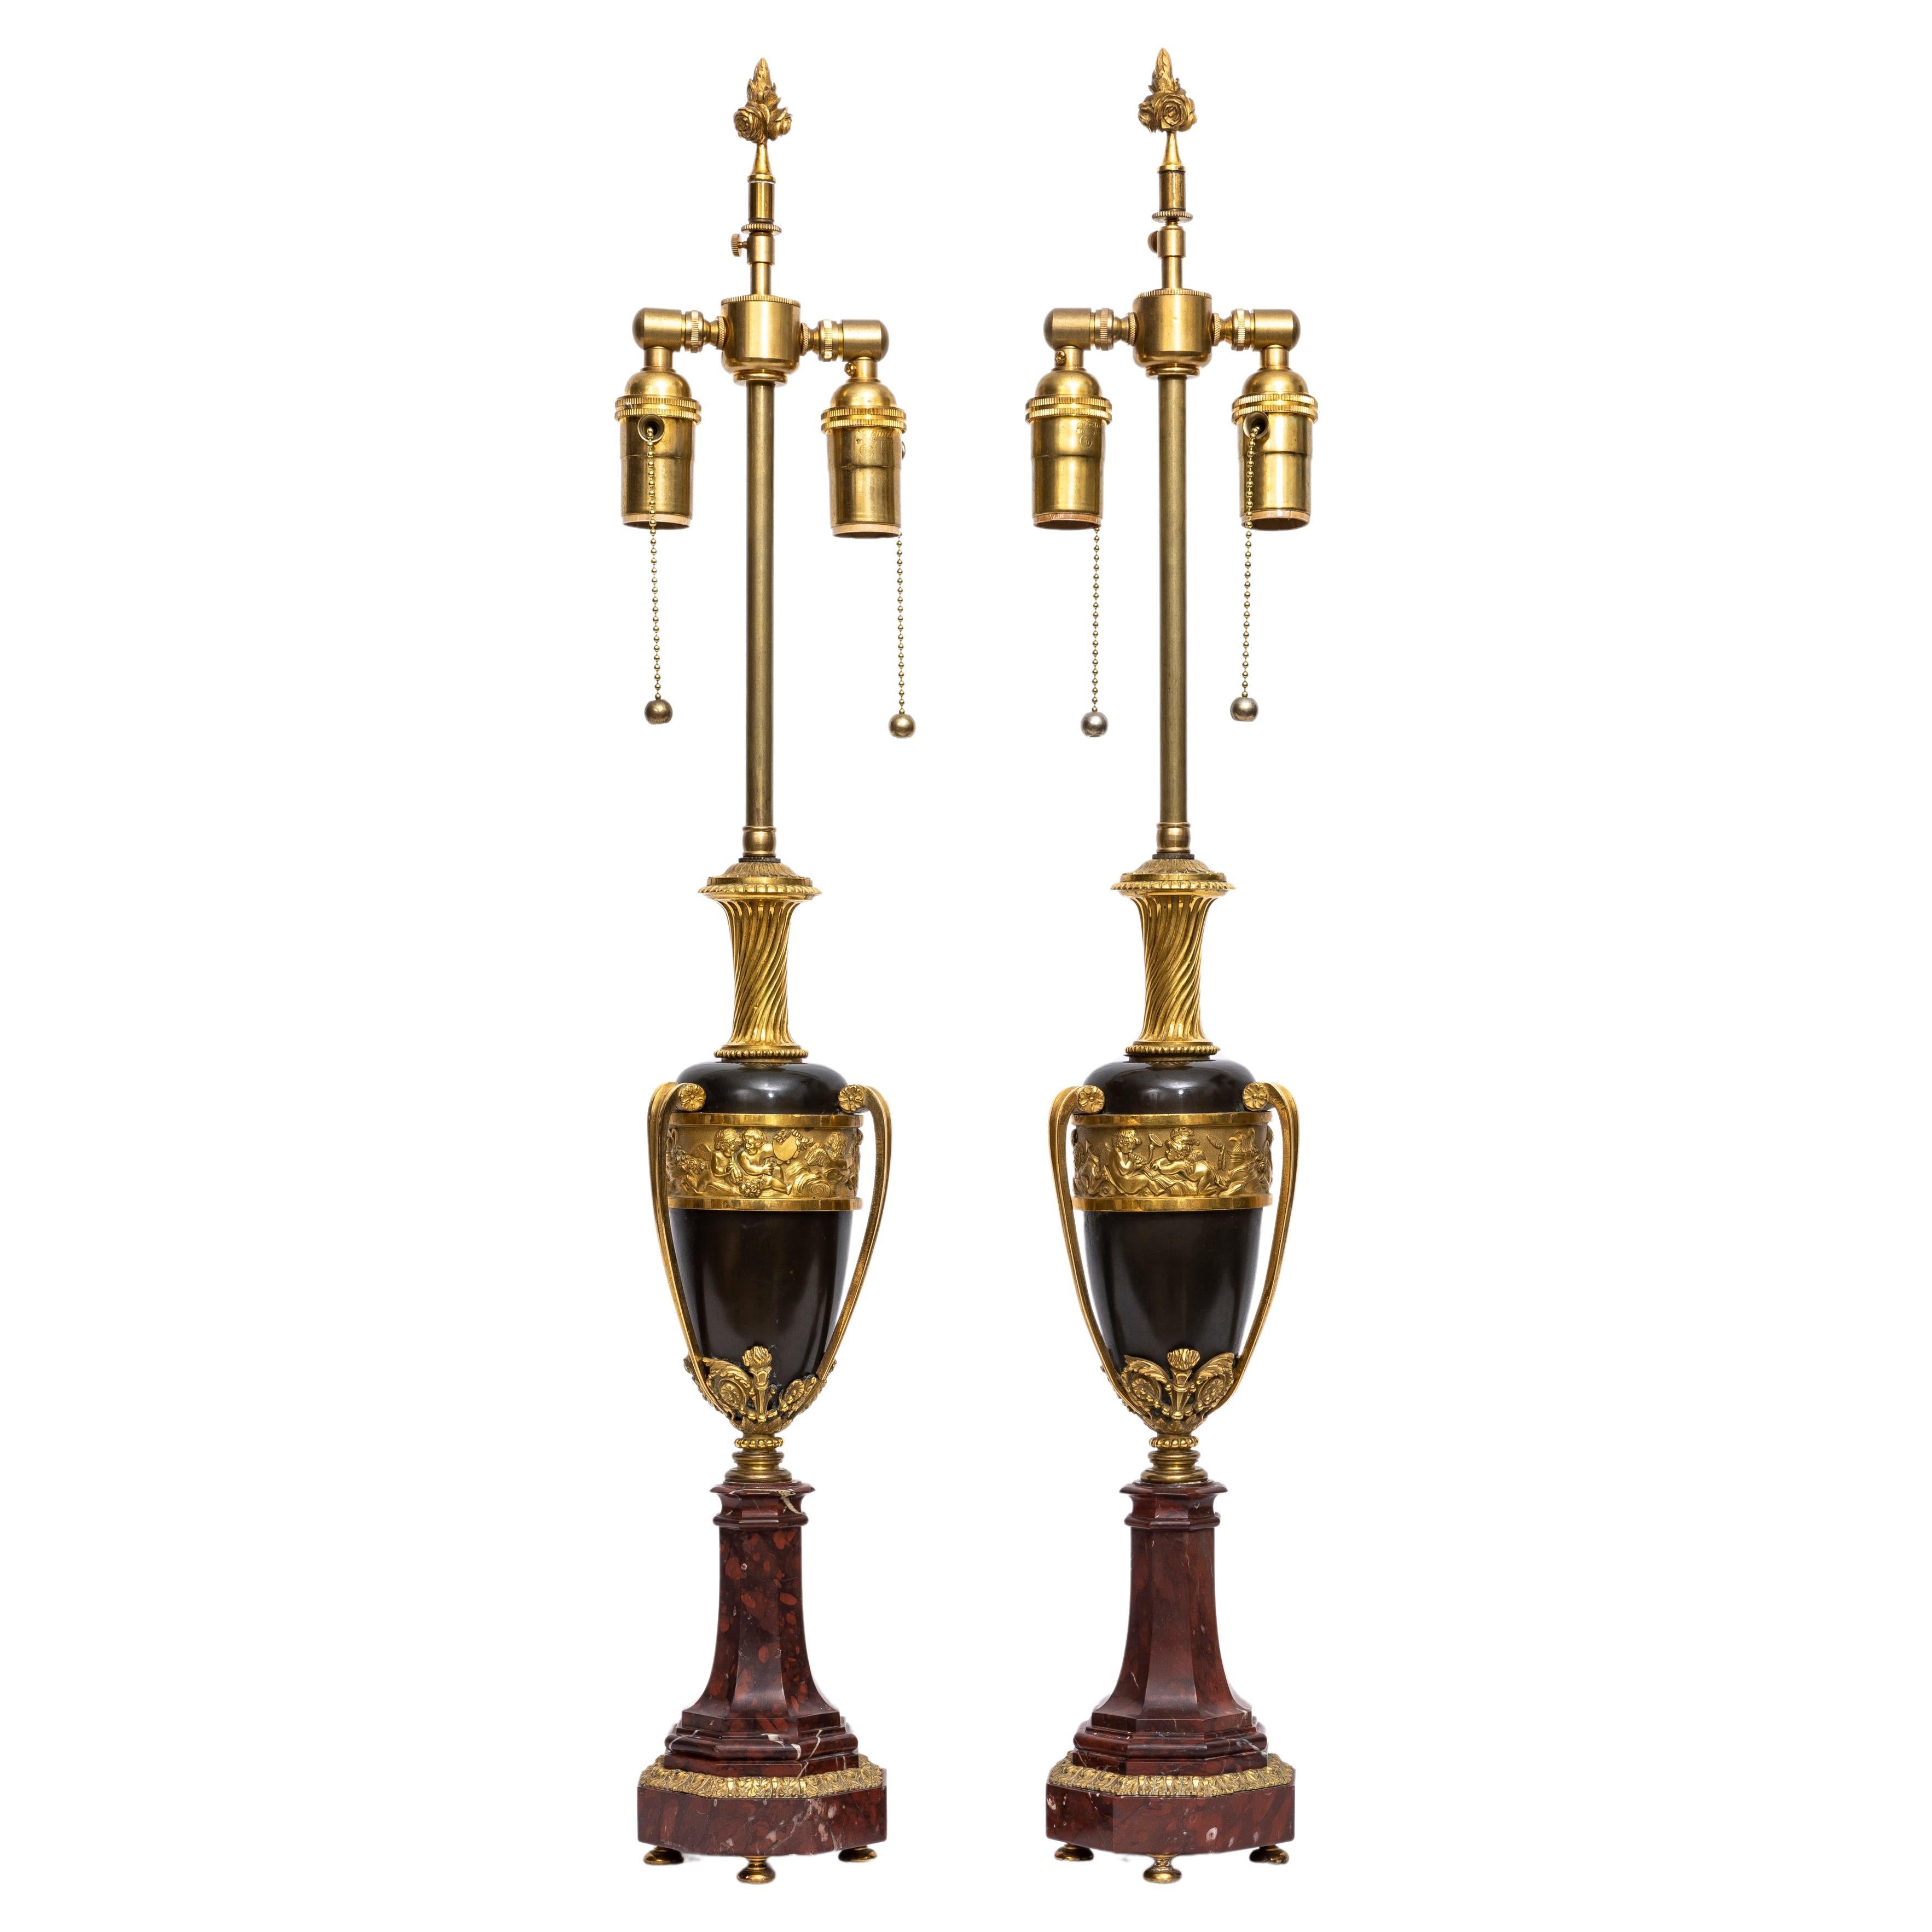 Pair of 18th C. French Louis XVI Period Patinated and Dore Bronze Vases/Lamps